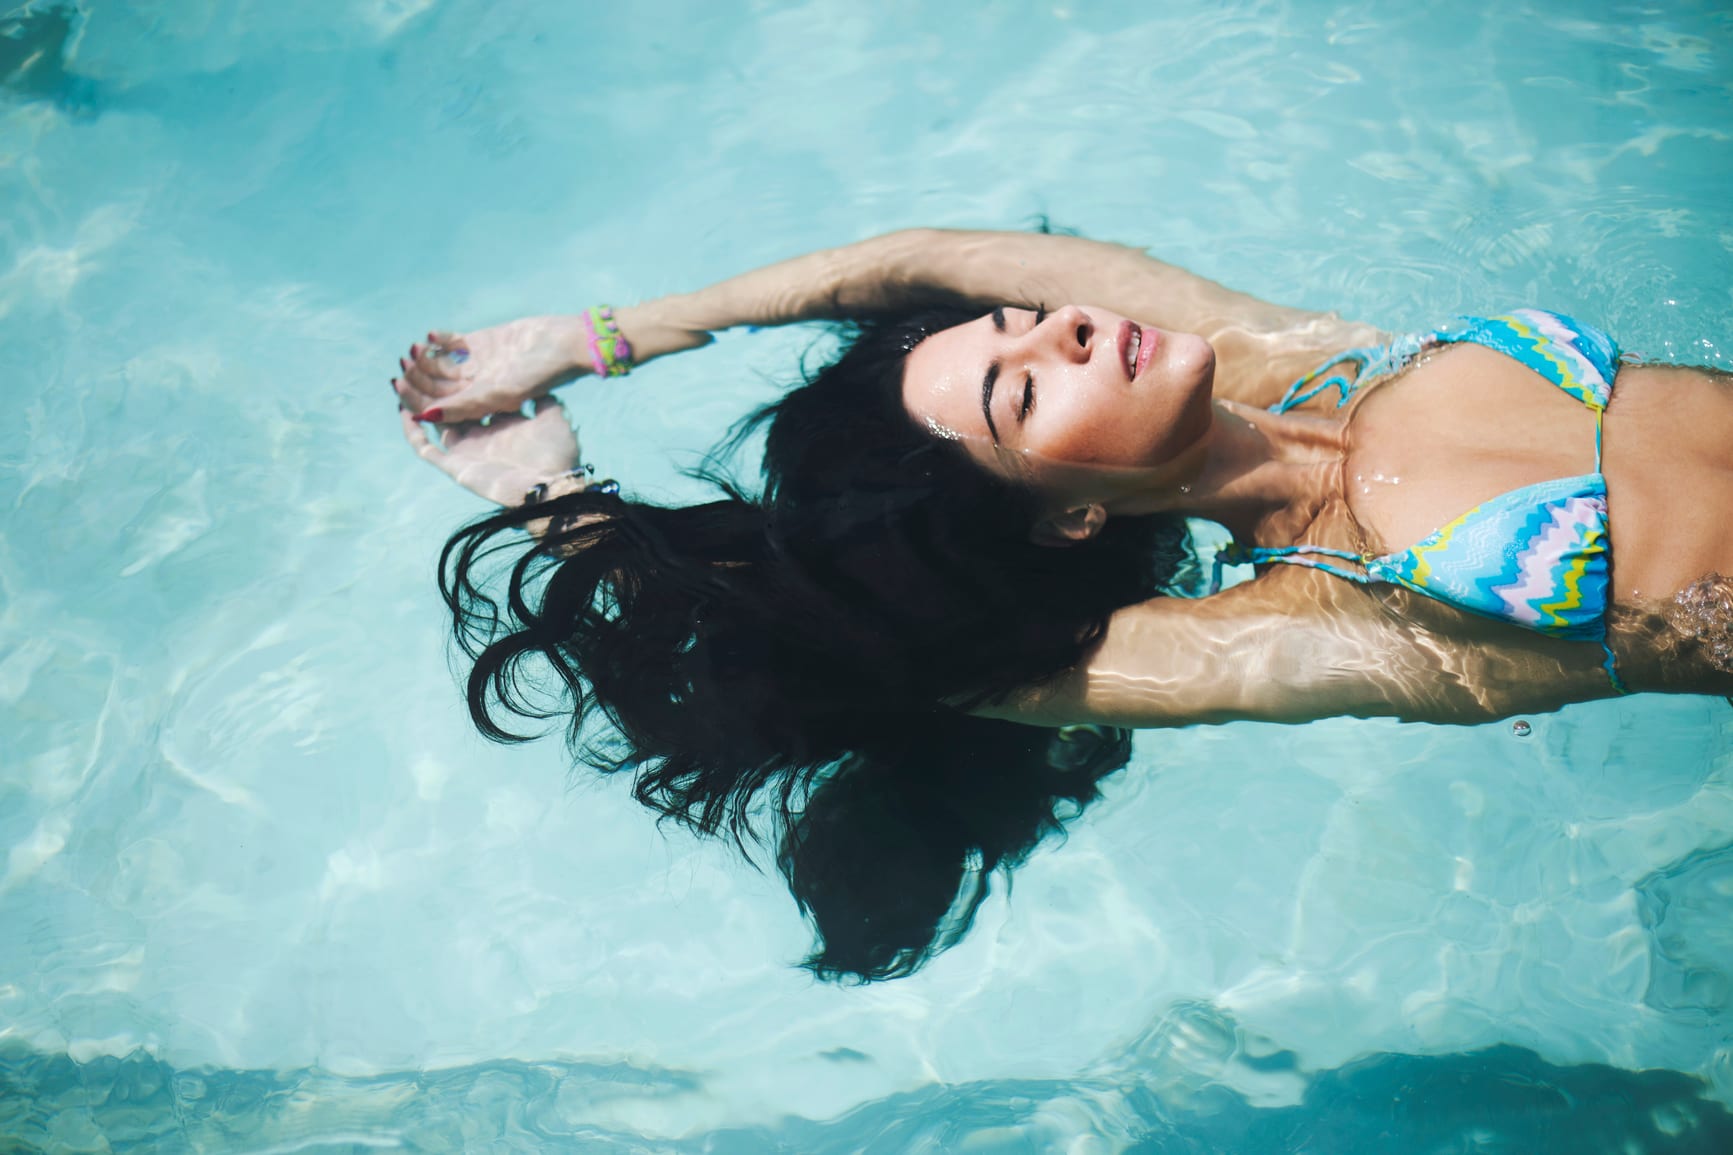 An attrative young woman with black hair floating on the water.